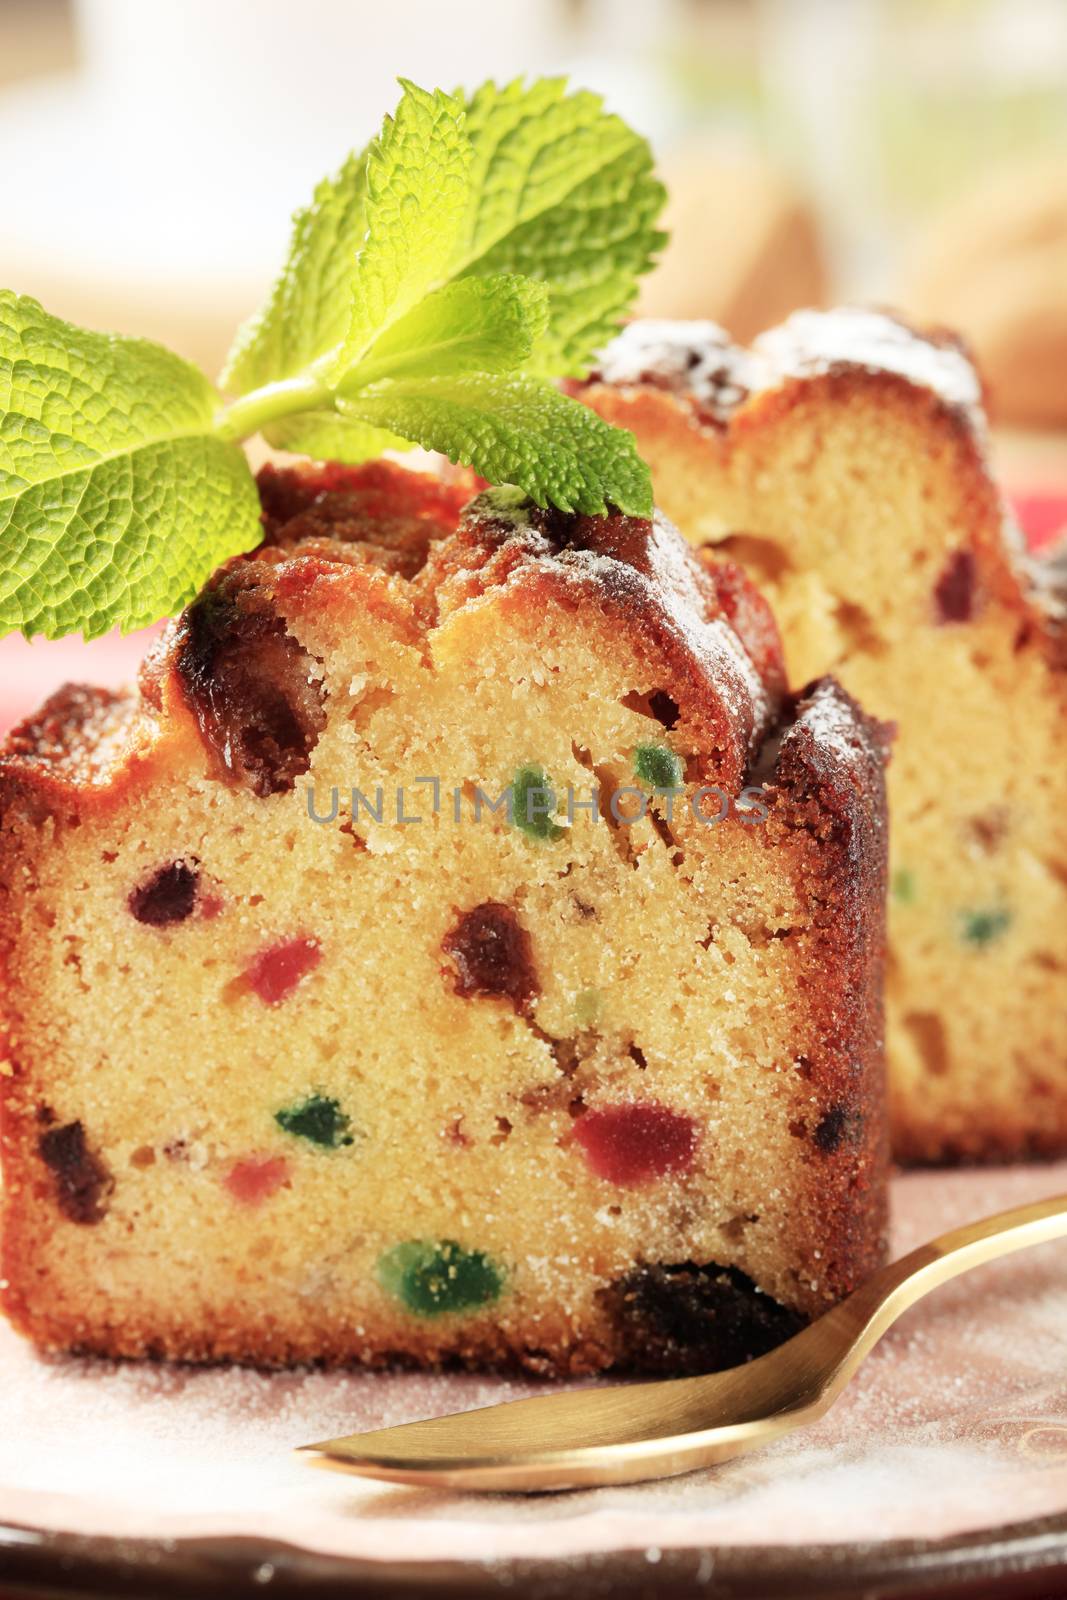 Slices of fruitcake by Digifoodstock